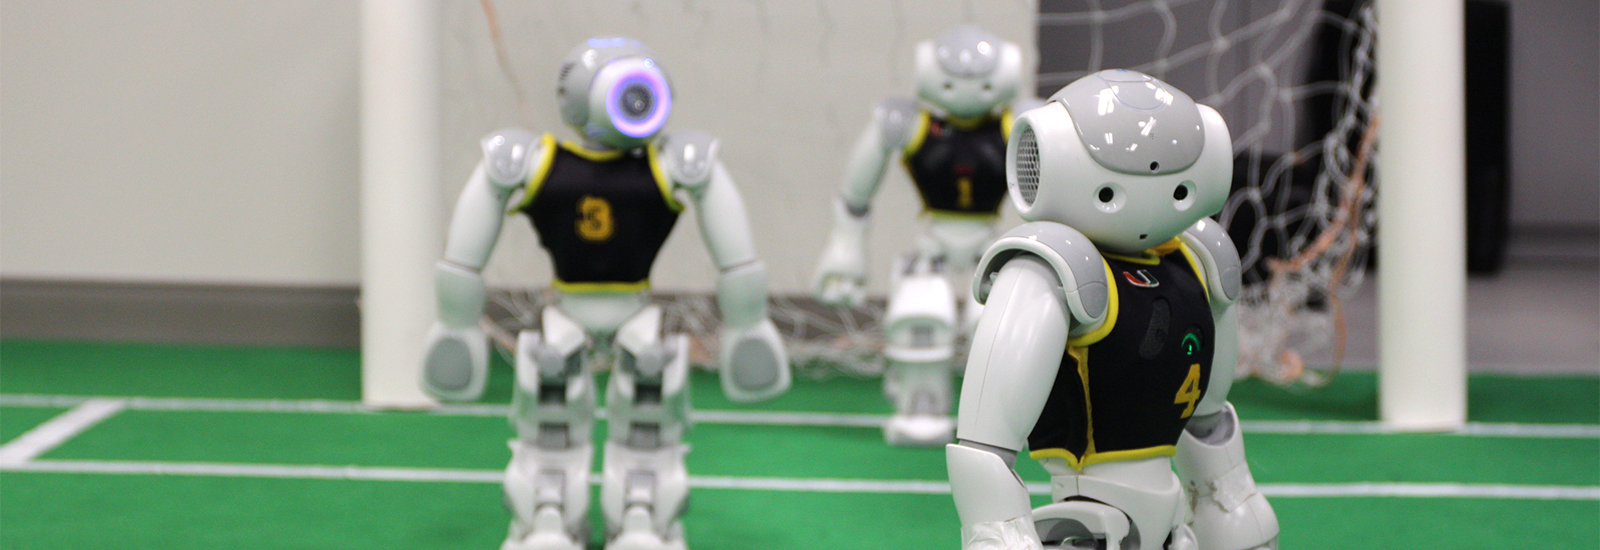 soccer-playing robots 